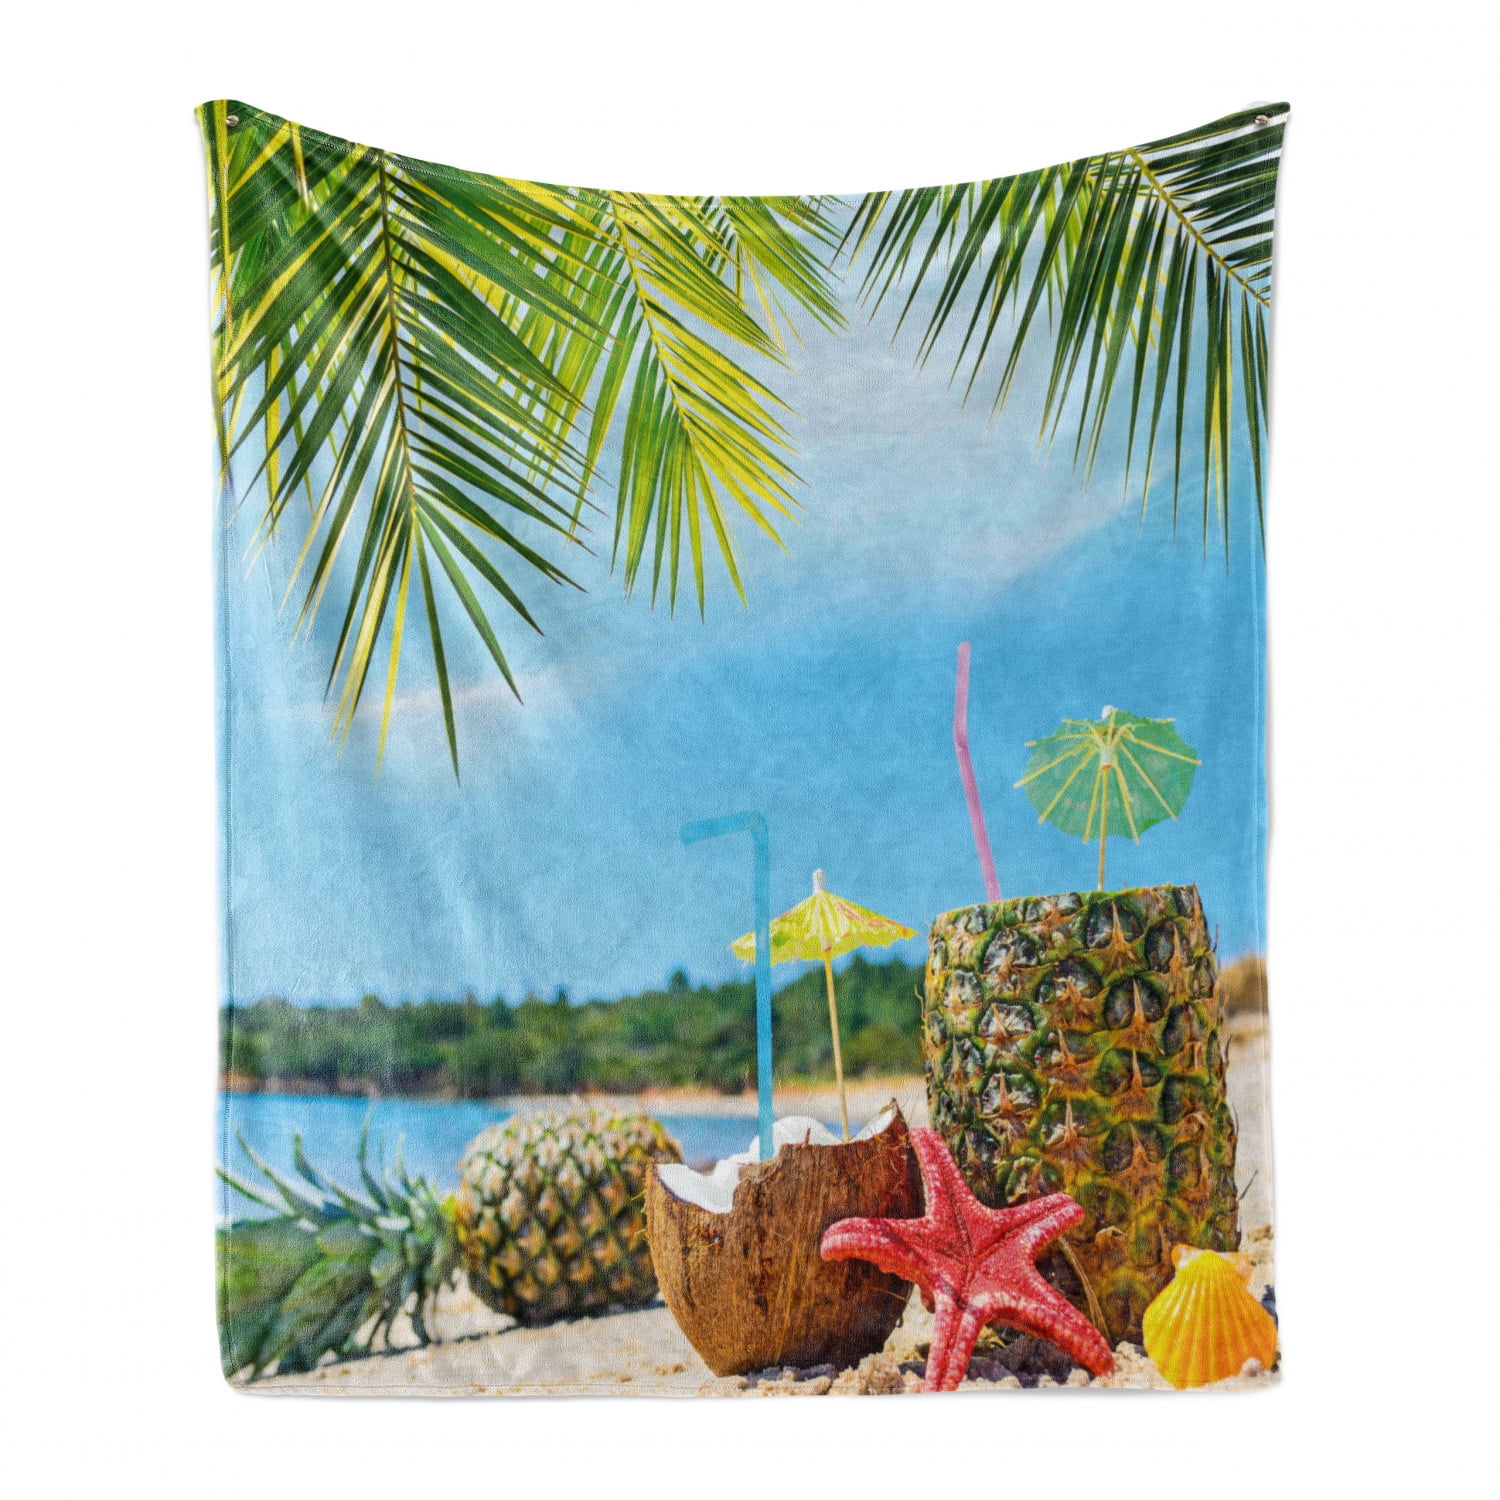 Flannel Fleece Blanket Full Size Pineapple Coconut Palm Leaves Blanket,All-Season Plush Blanket for Couch Bed Travelling Camping Or Kids Adults 60X50 